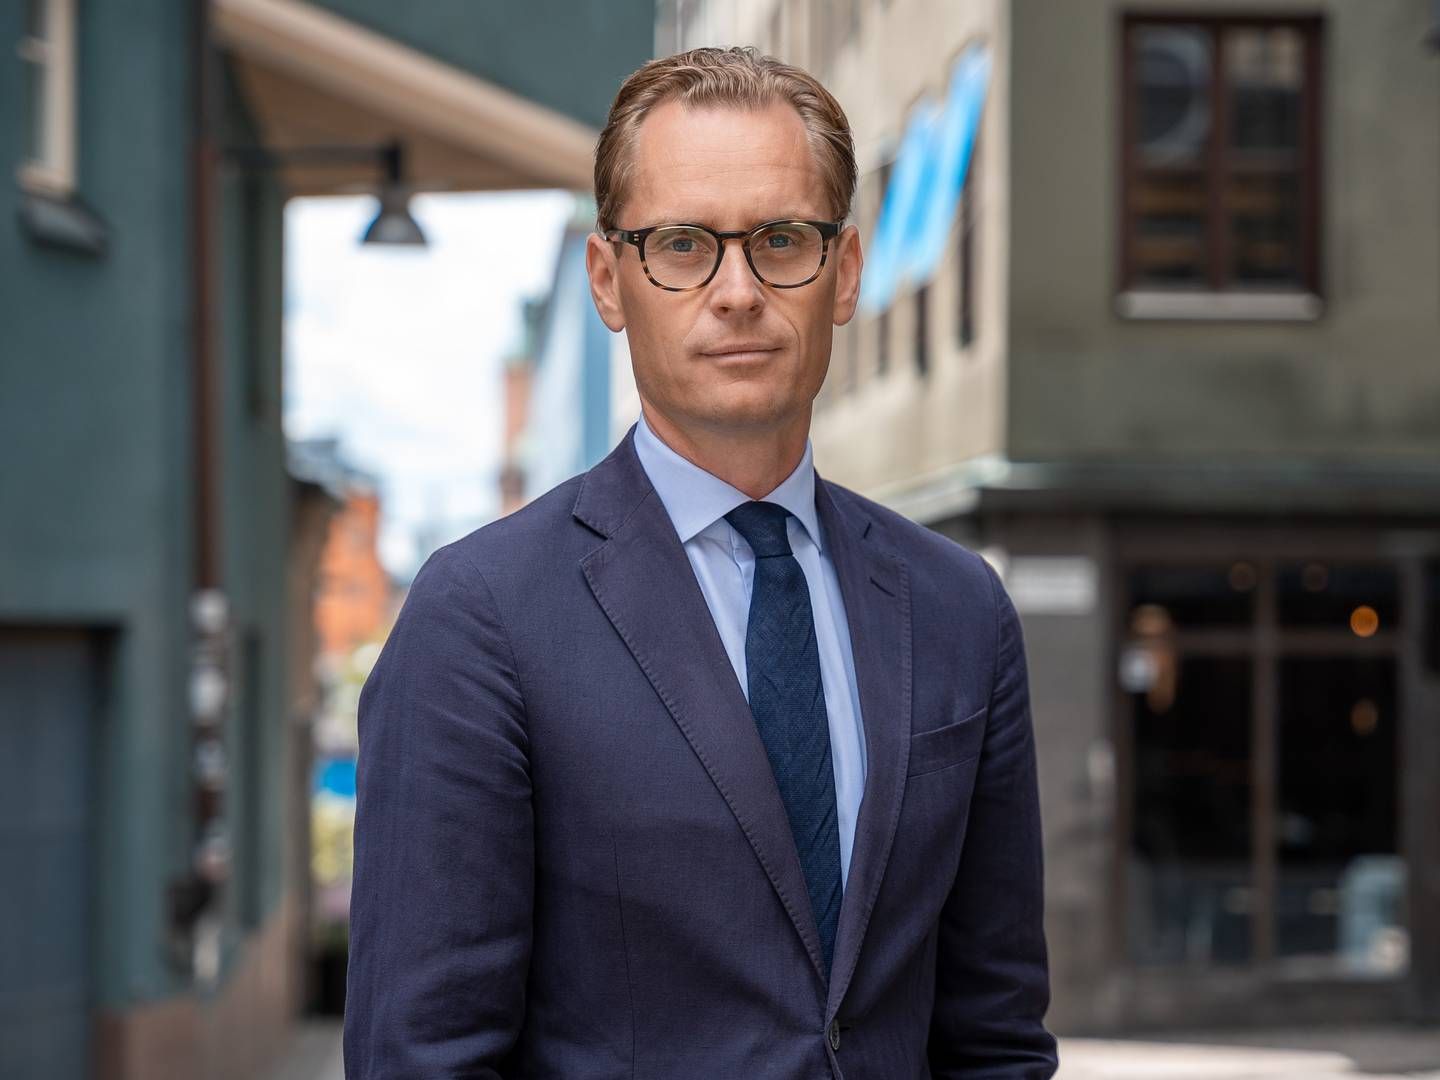 Ola Arvidsson switches to Coeli from rival Formue Sweden, where he has been deputy CEO and head of wealth management since 2021. | Foto: PR / Coeli